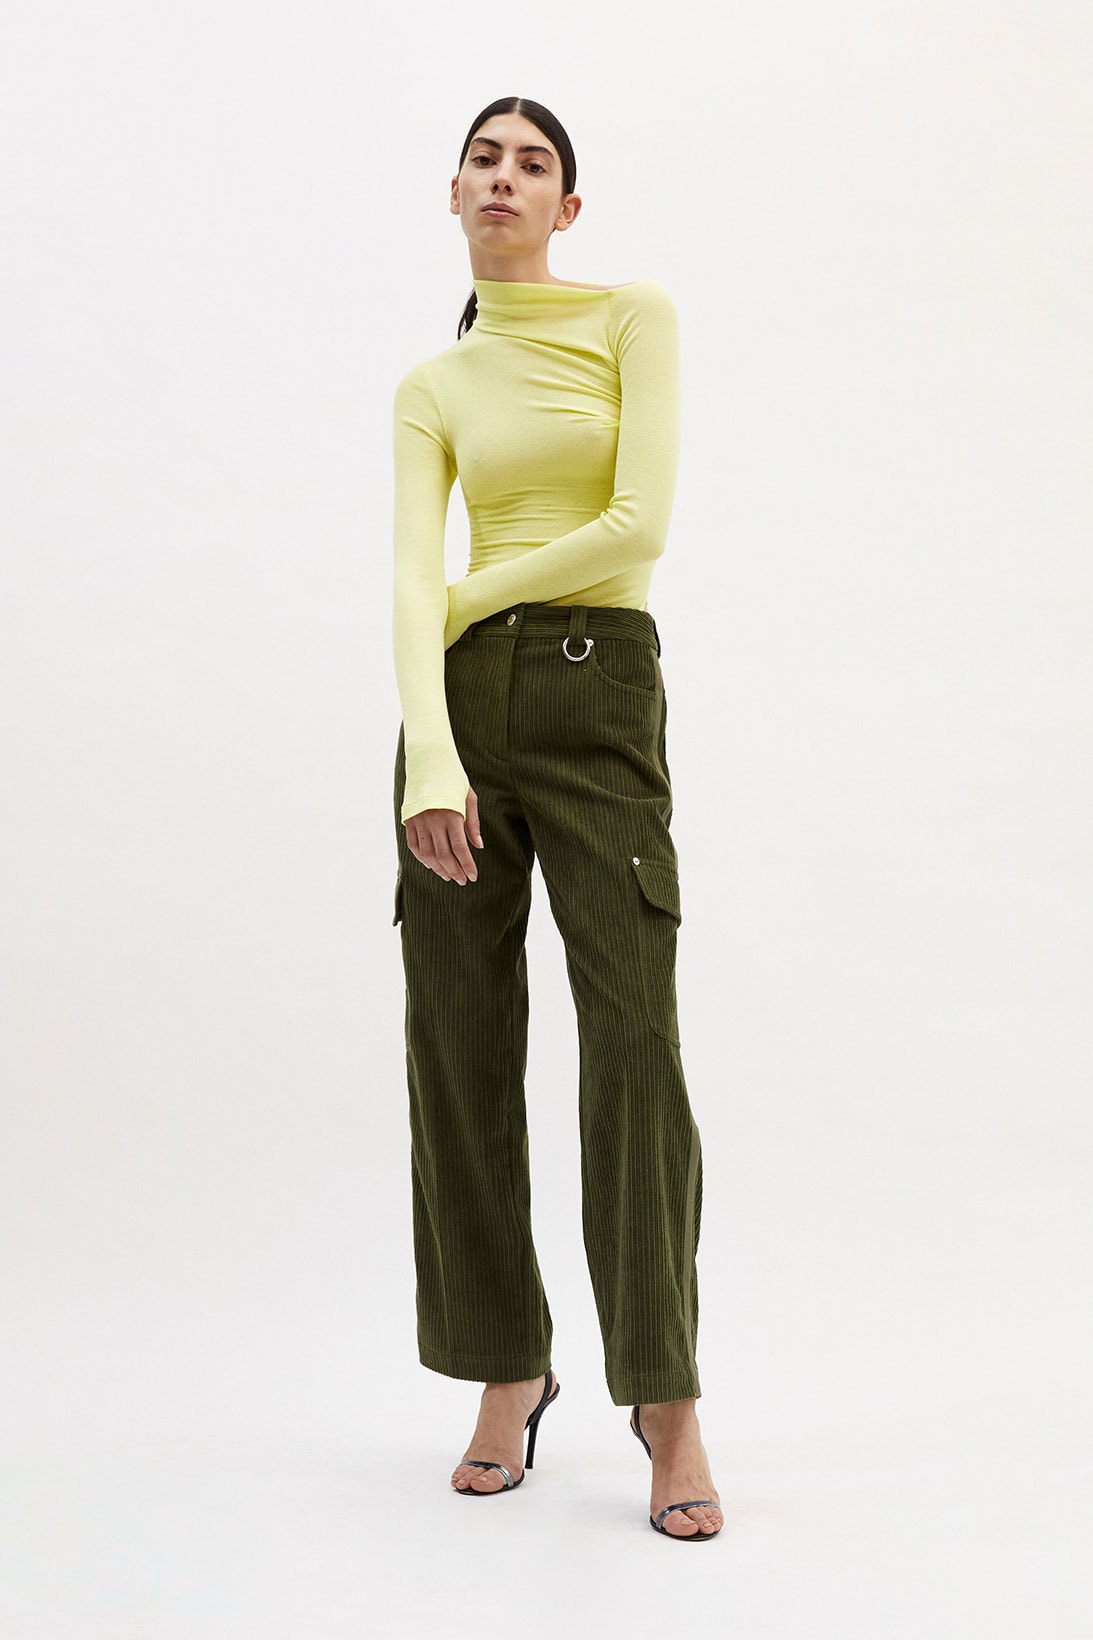 helmut lang fall winter 2021 fw21 collection lookbook corduroy pants sweater